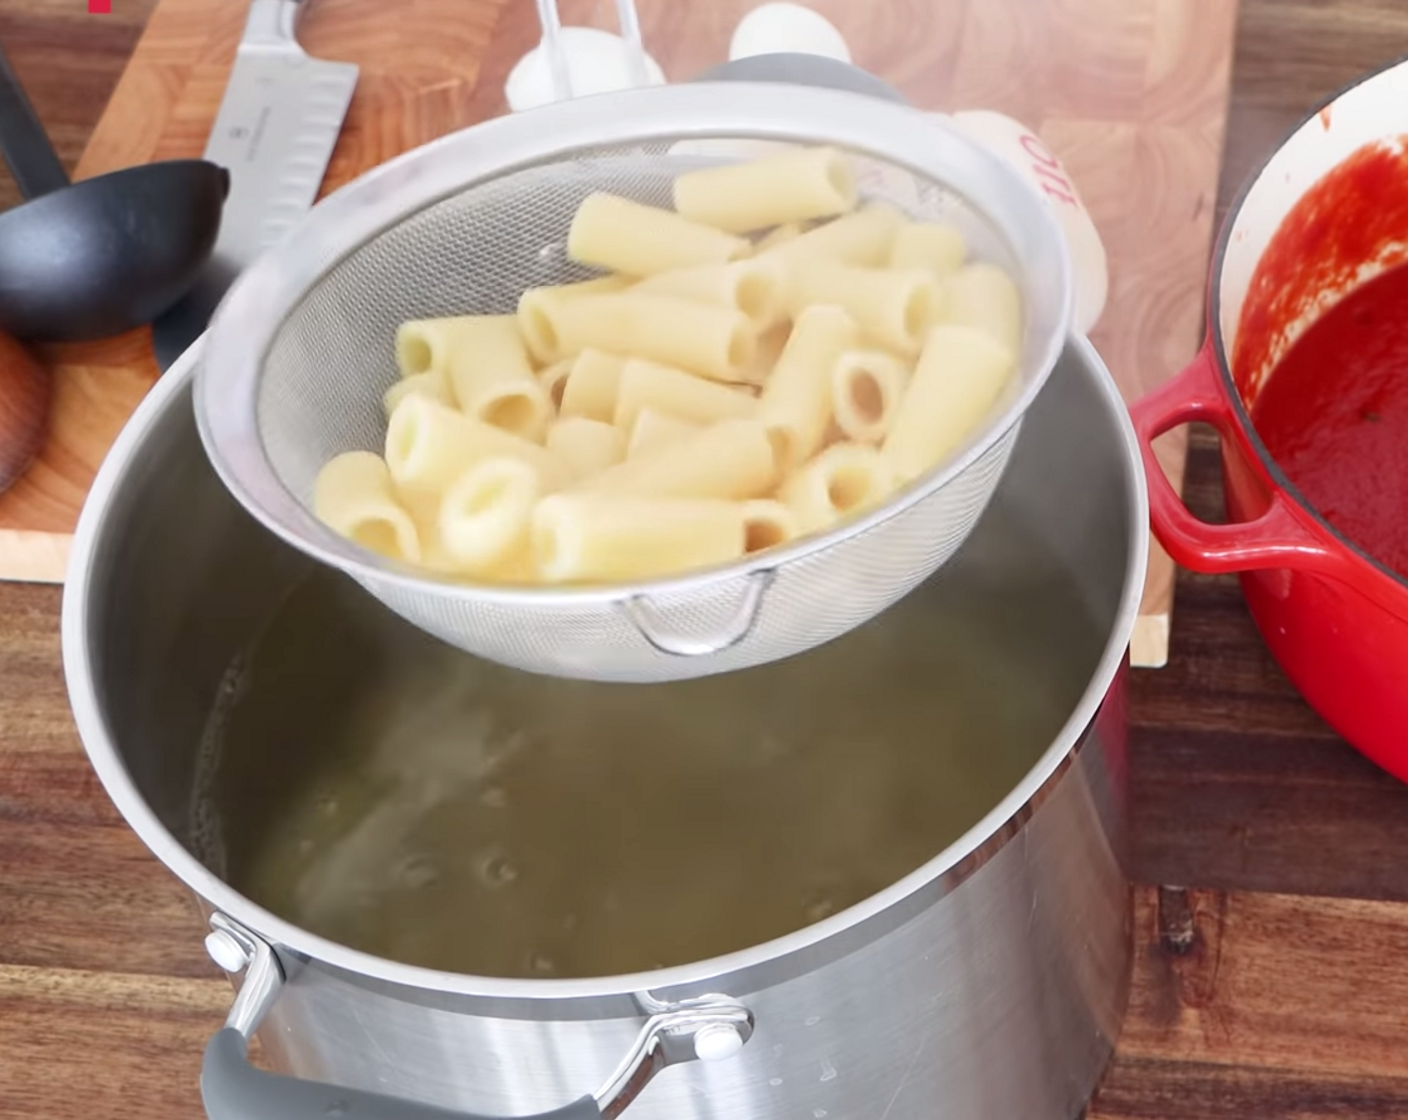 step 15 Strain your pasta 3 minutes before the instruction time – otherwise, your pasta will overcook